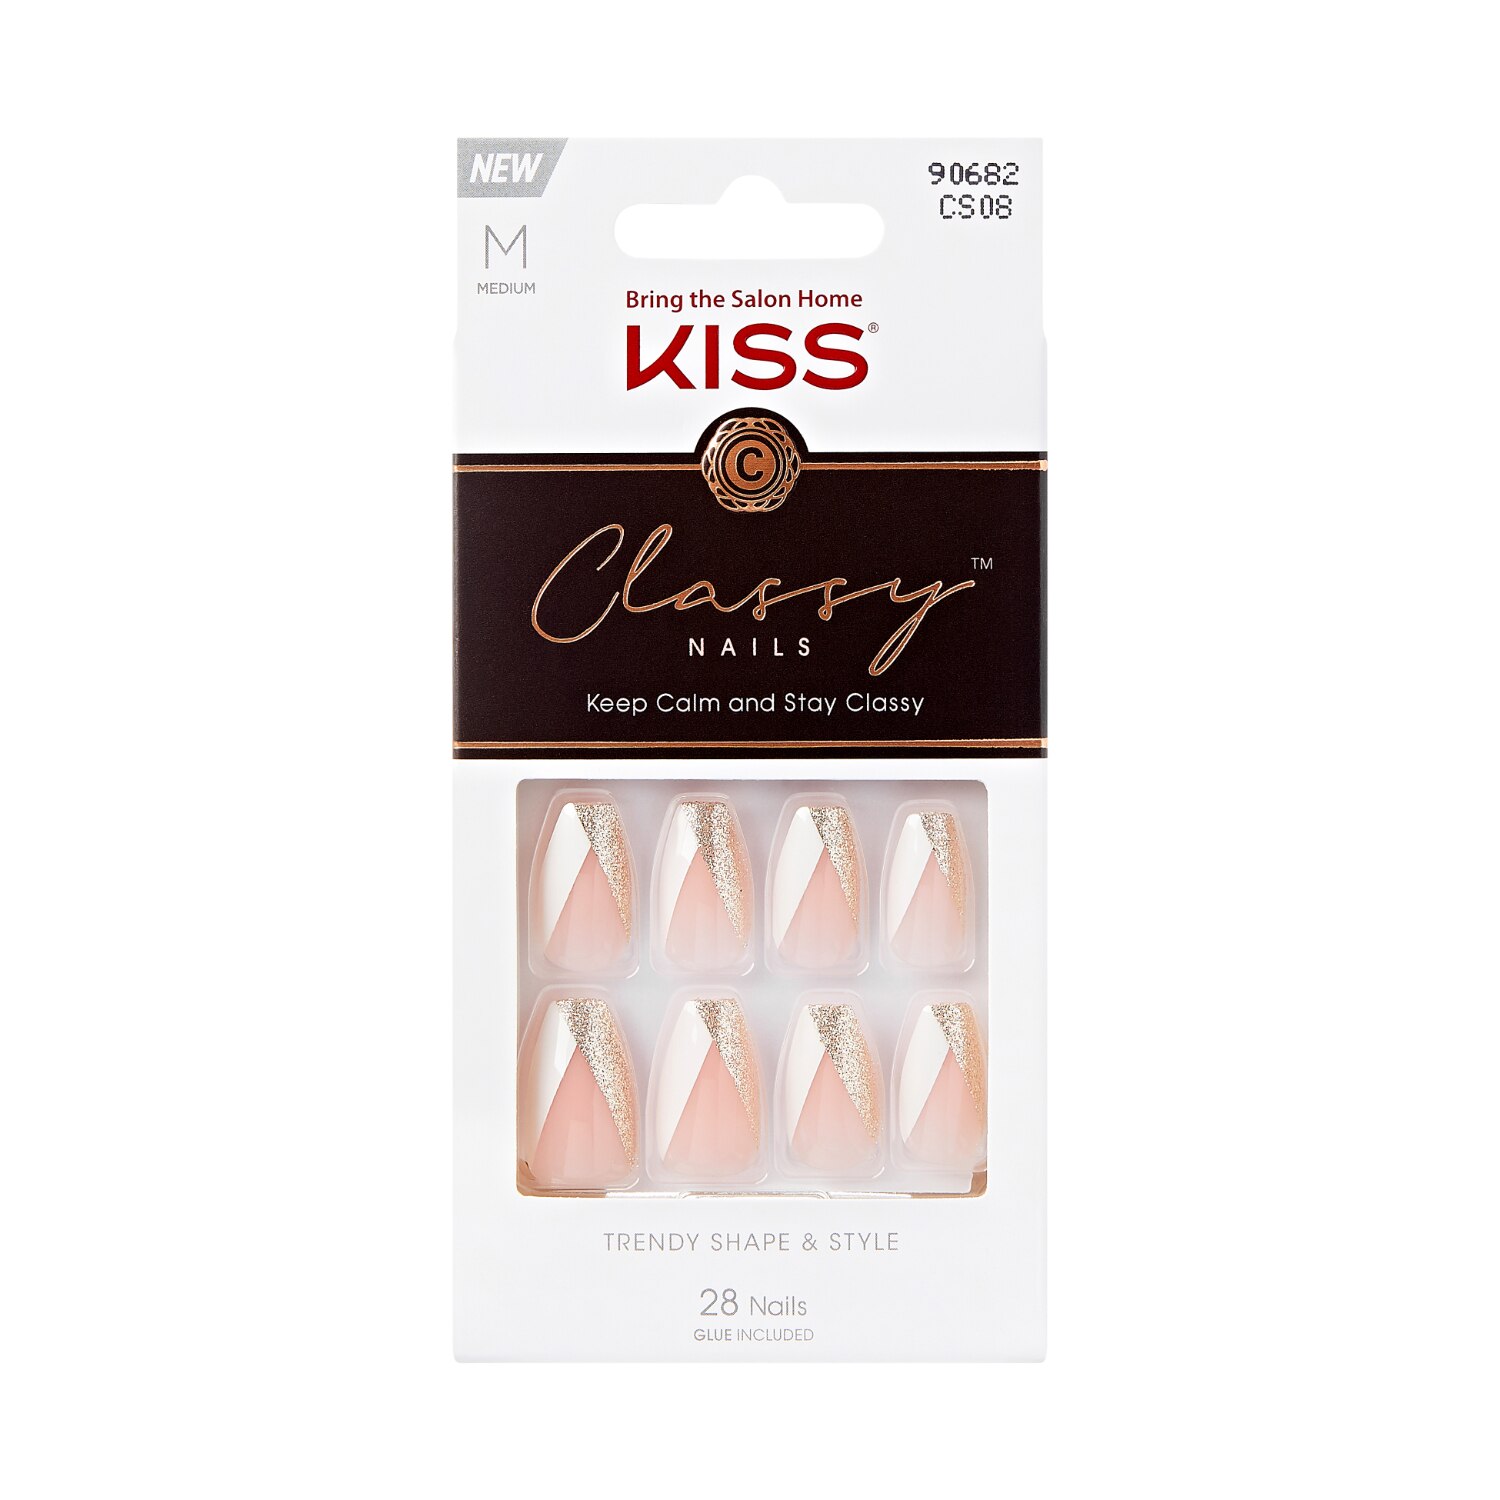 KISS Classy Press-On Nails, The BOSS, Glittery French, Medium Coffin, 31 Ct.